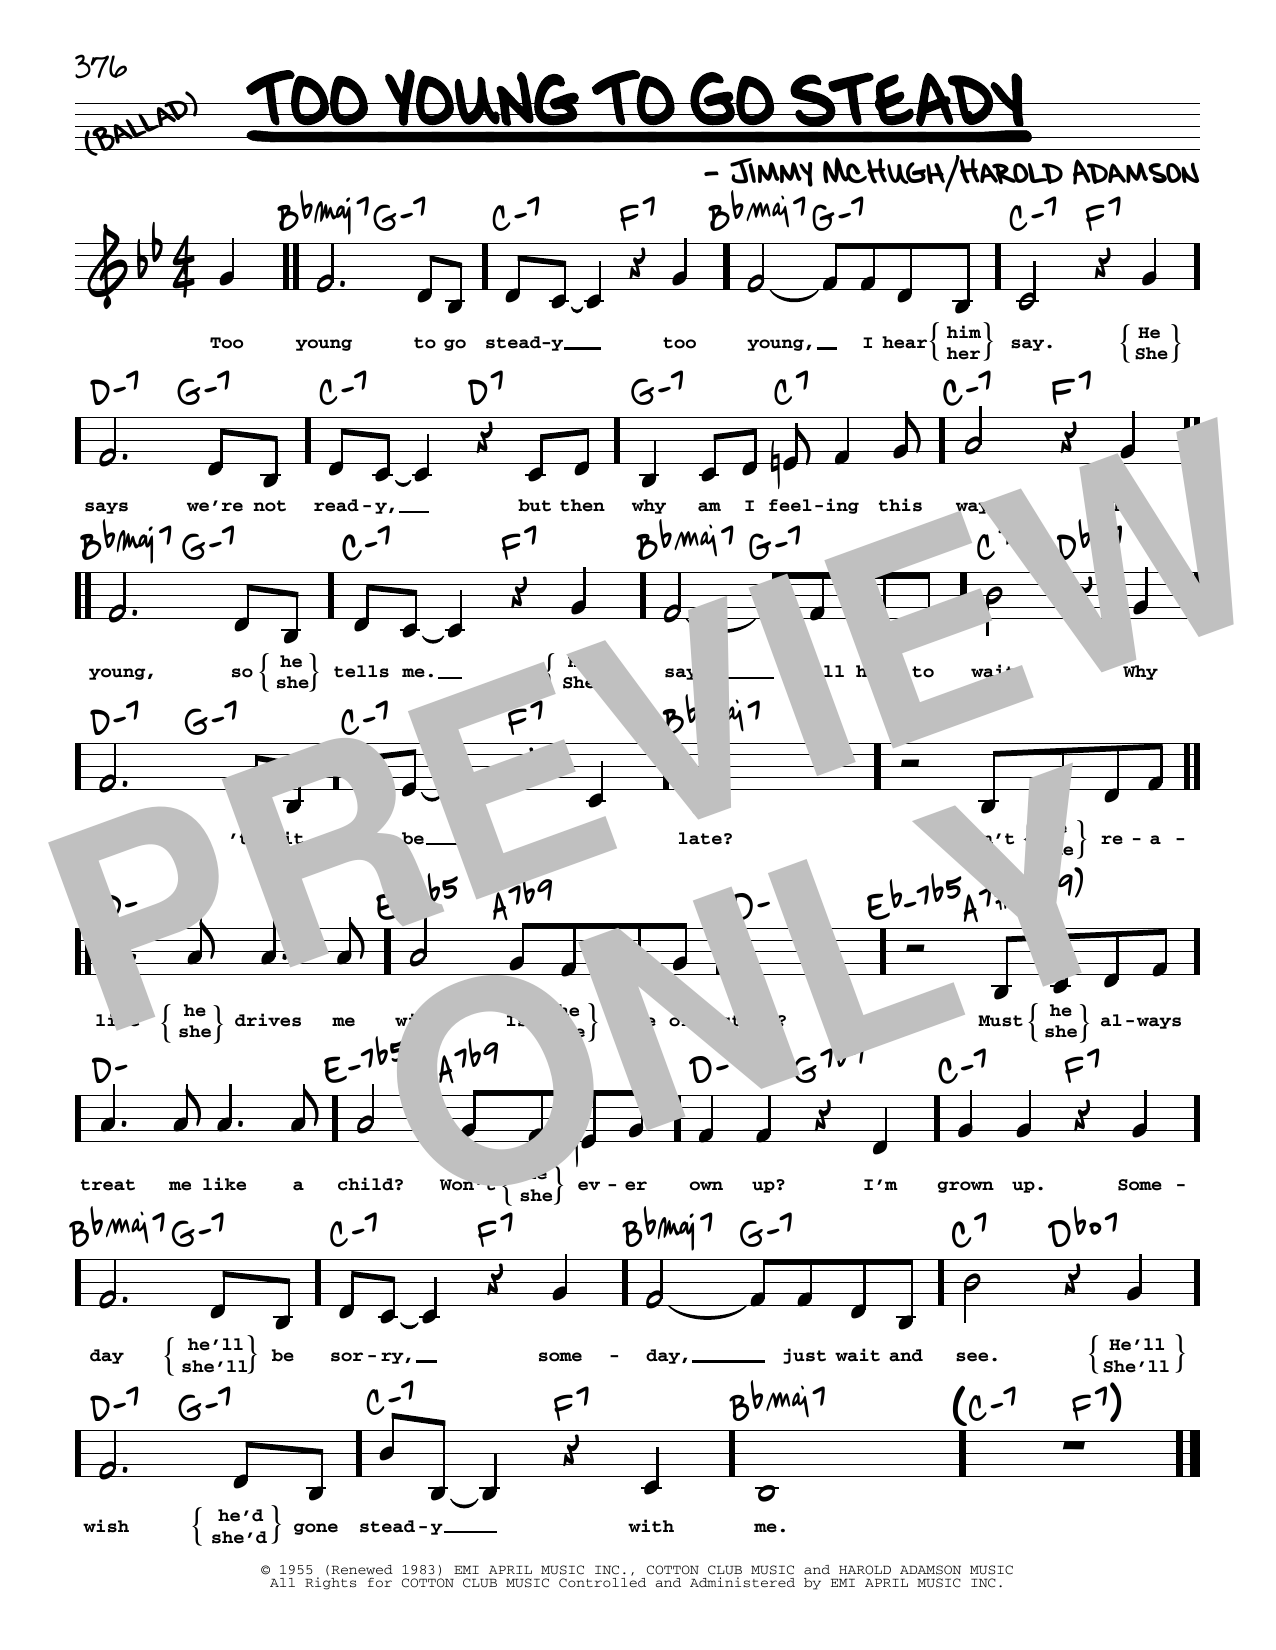 Harold Adamson Too Young To Go Steady (Low Voice) sheet music notes printable PDF score